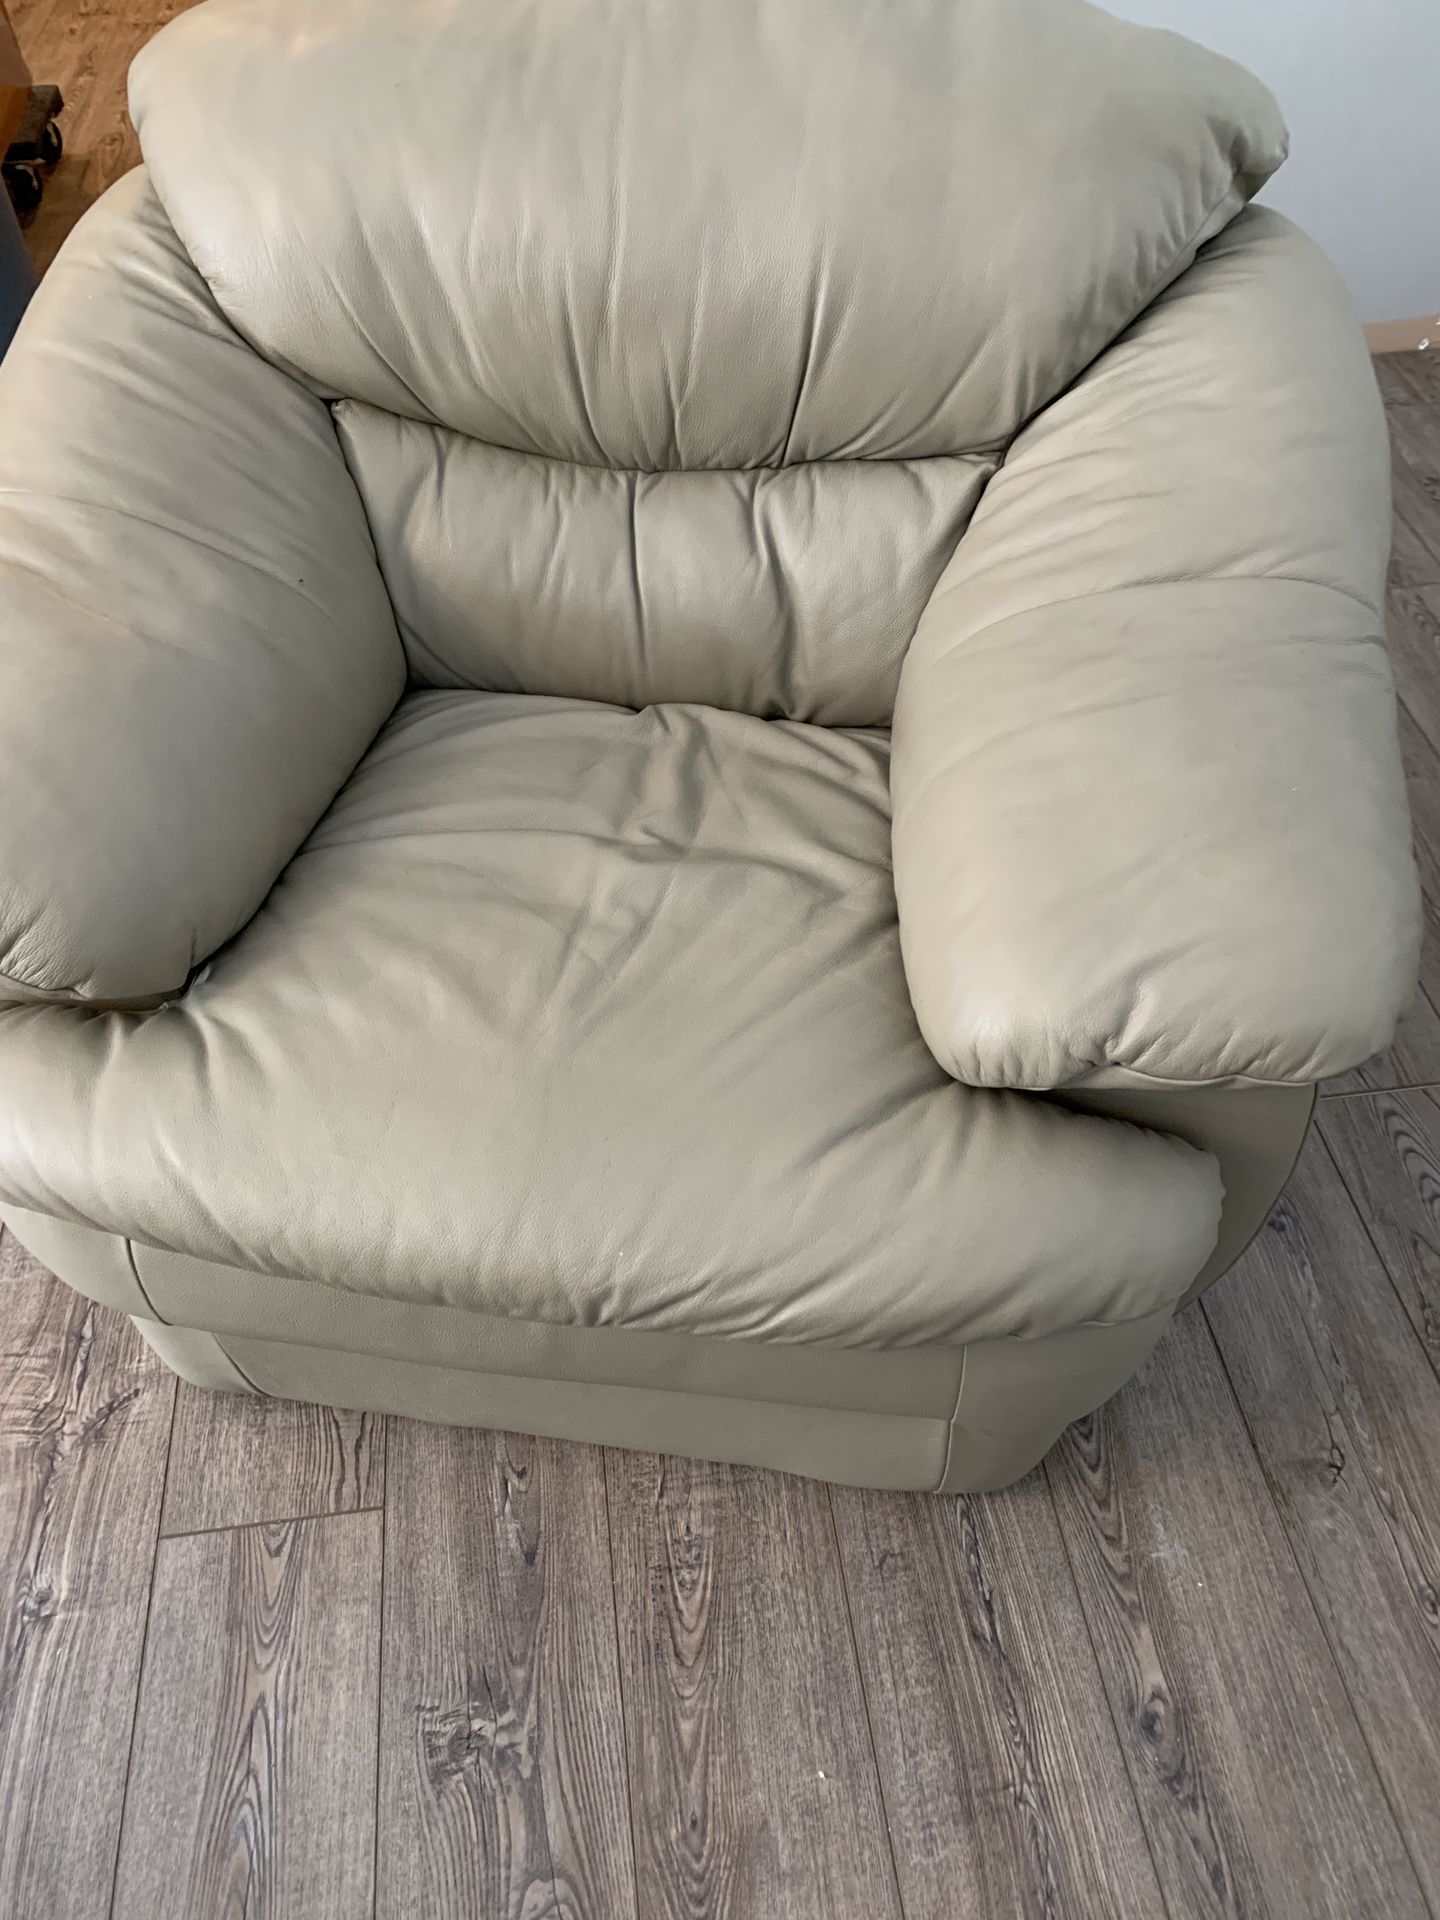 Comfy Chair - Lounging For Living Area Or Den 